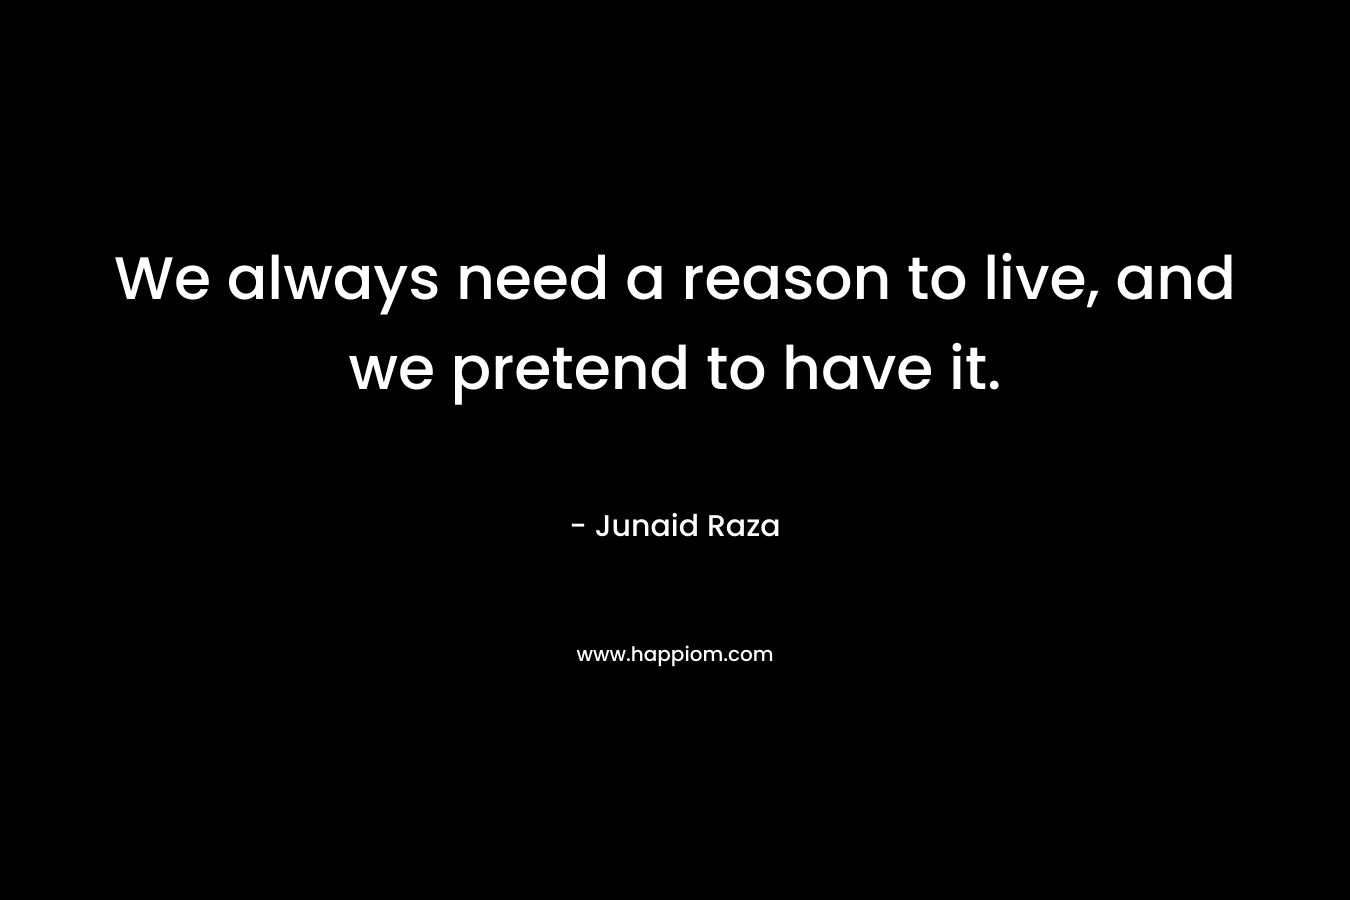 We always need a reason to live, and we pretend to have it.